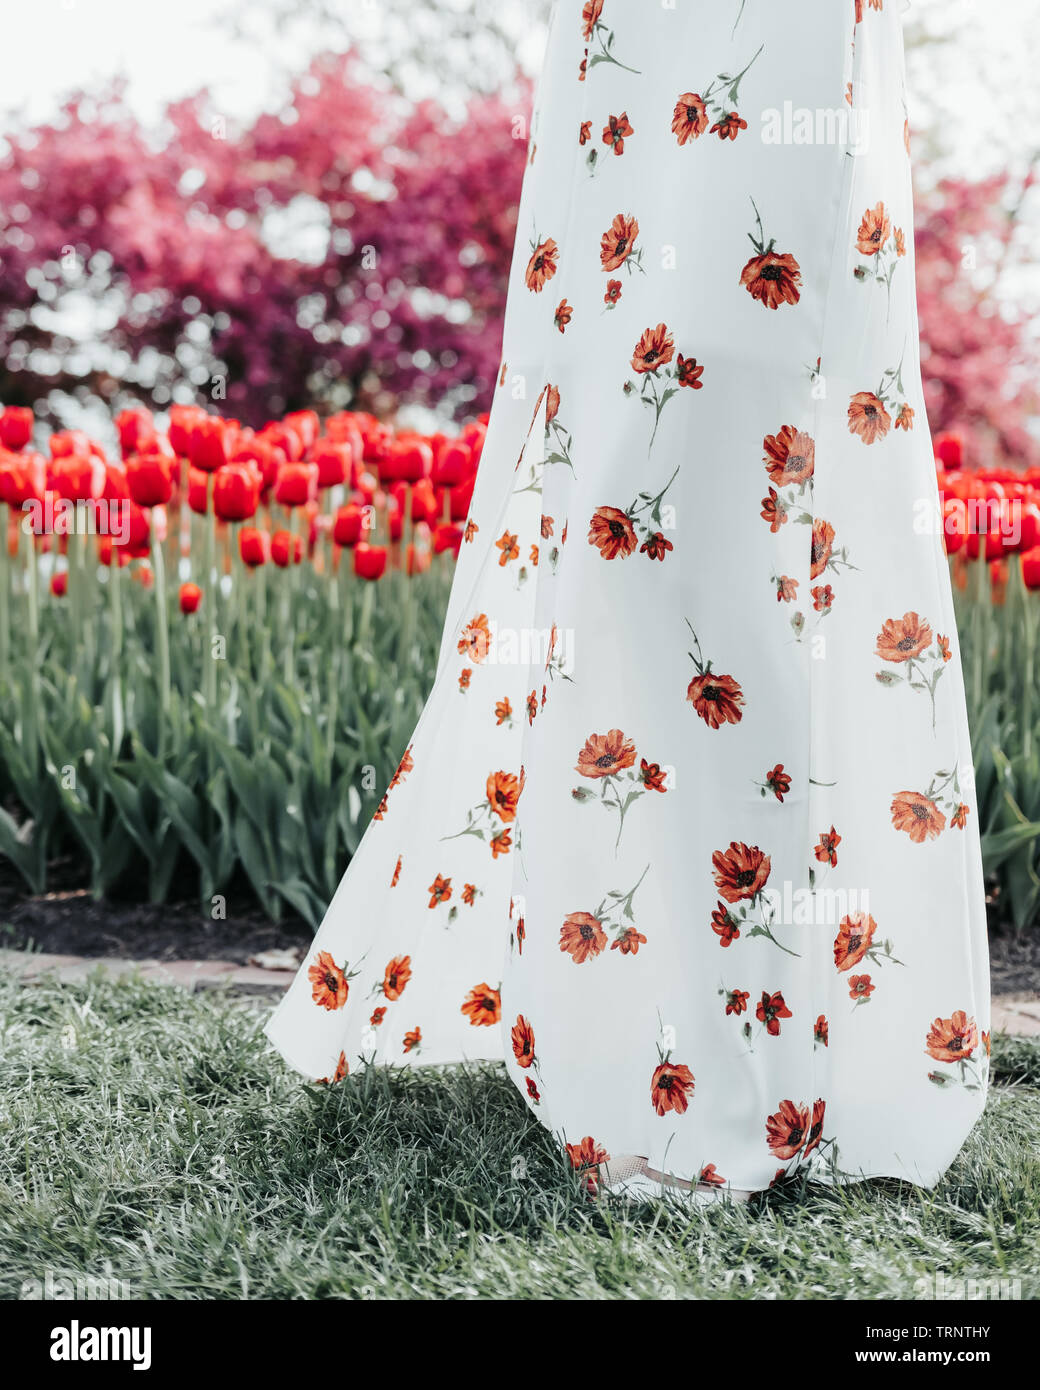 A floral dress blows in the wind in front of a blurred row of red tulips and a purple Crabapple Tree. Tulip Time Festival in Pella, Iowa, USA. Stock Photo